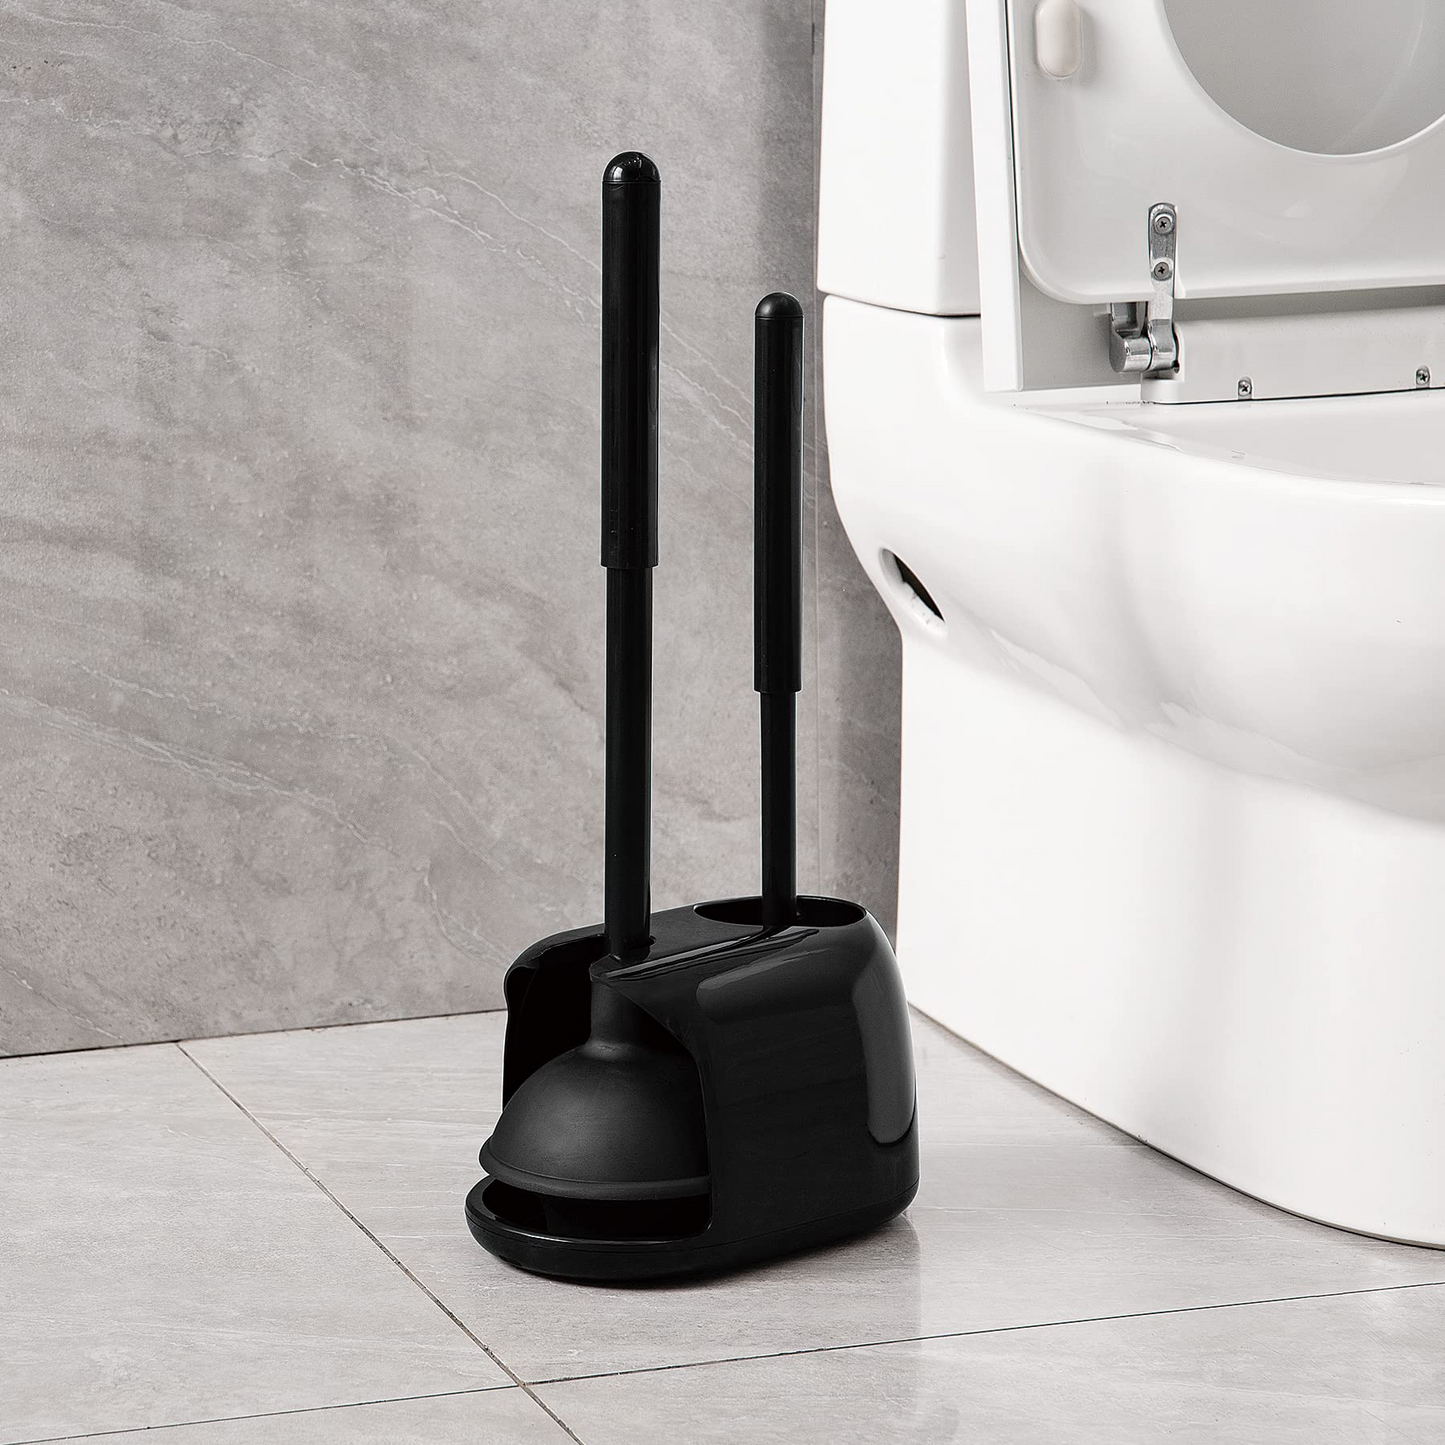 Toilet Plunger and Bowl Brush with Holder Combo Set for Bathroom